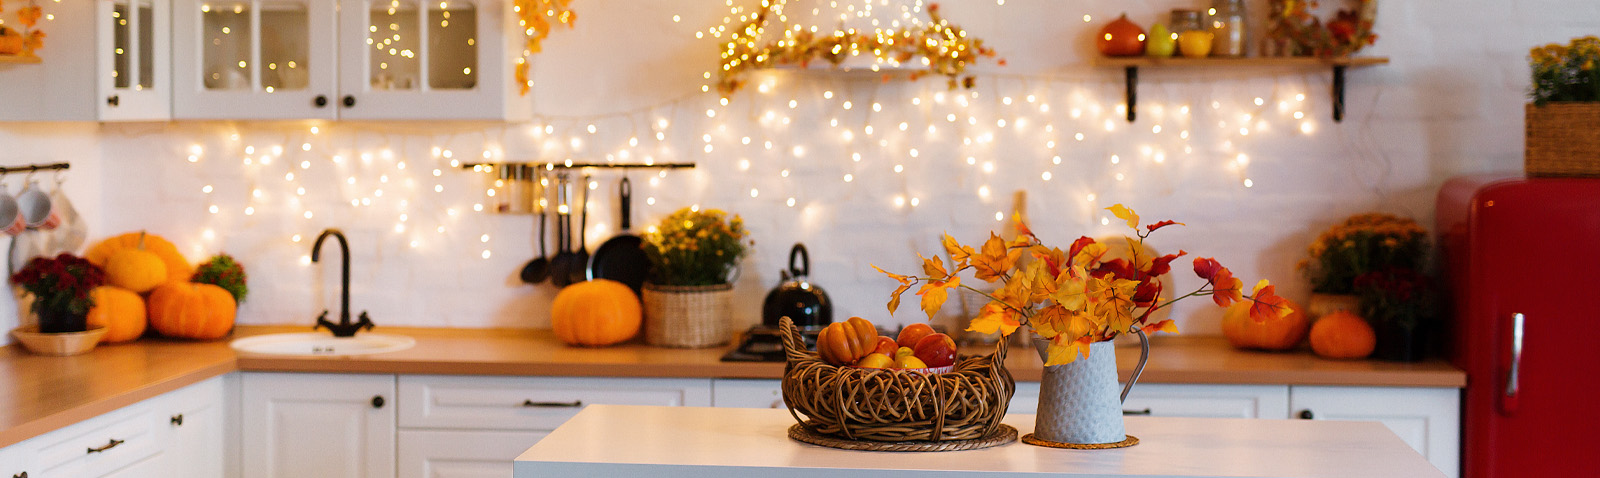 kitchen with fall decor